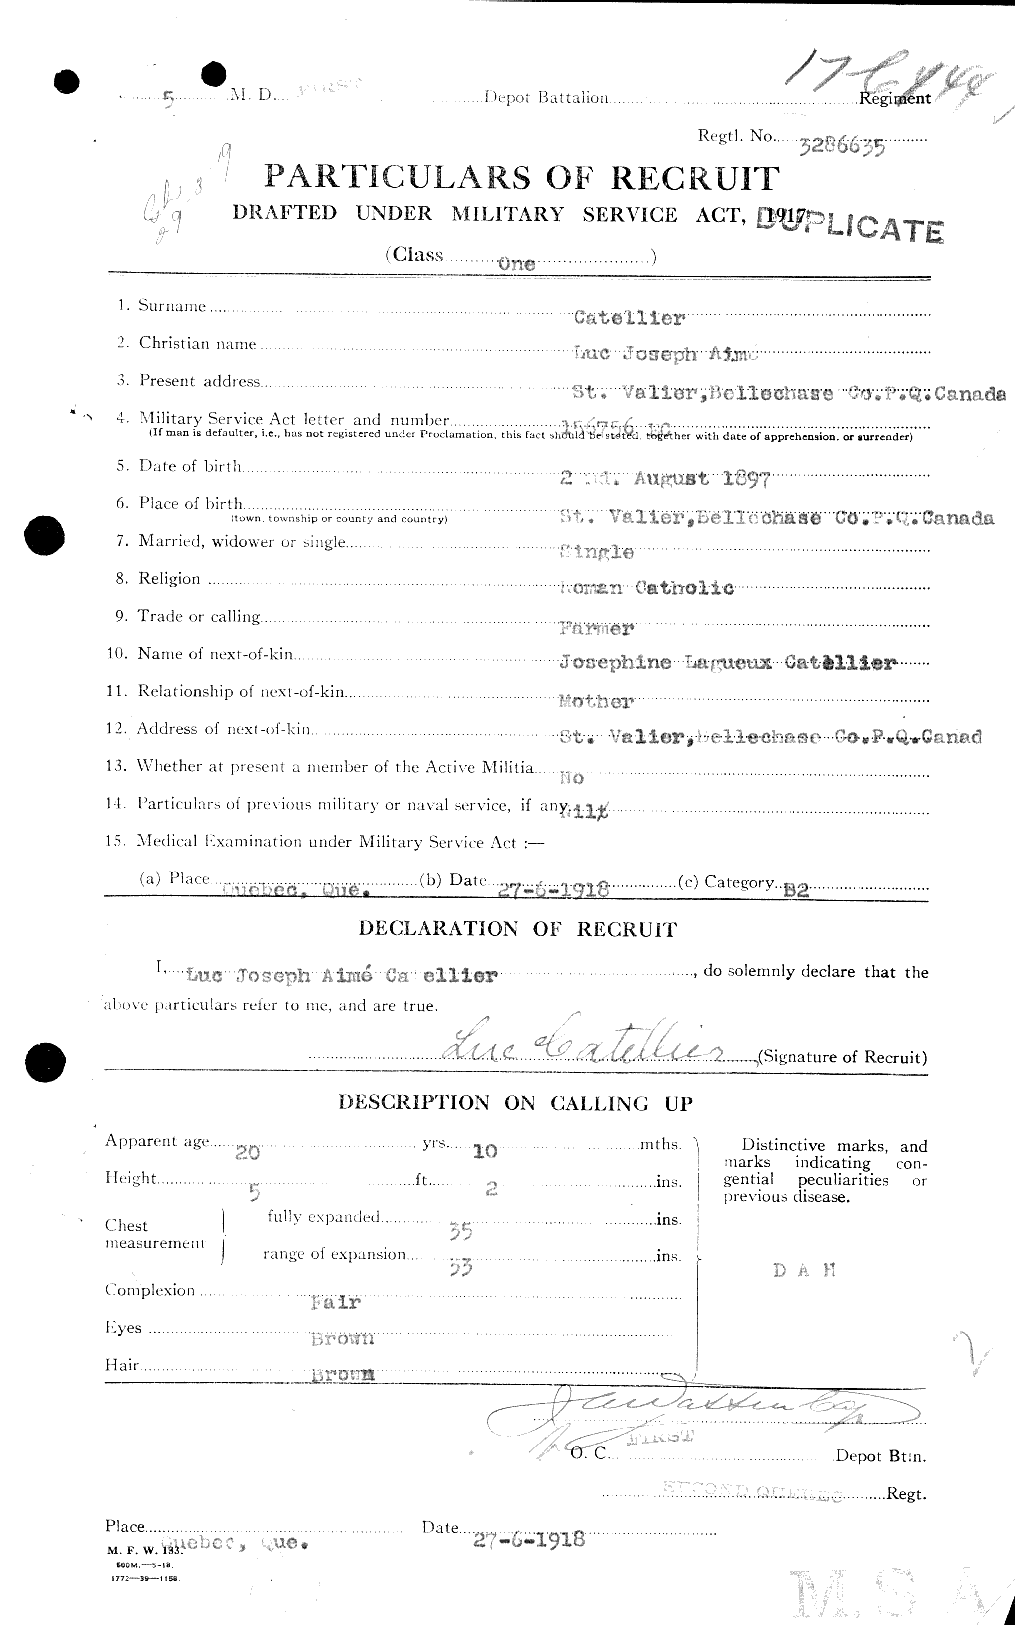 Personnel Records of the First World War - CEF 013193a